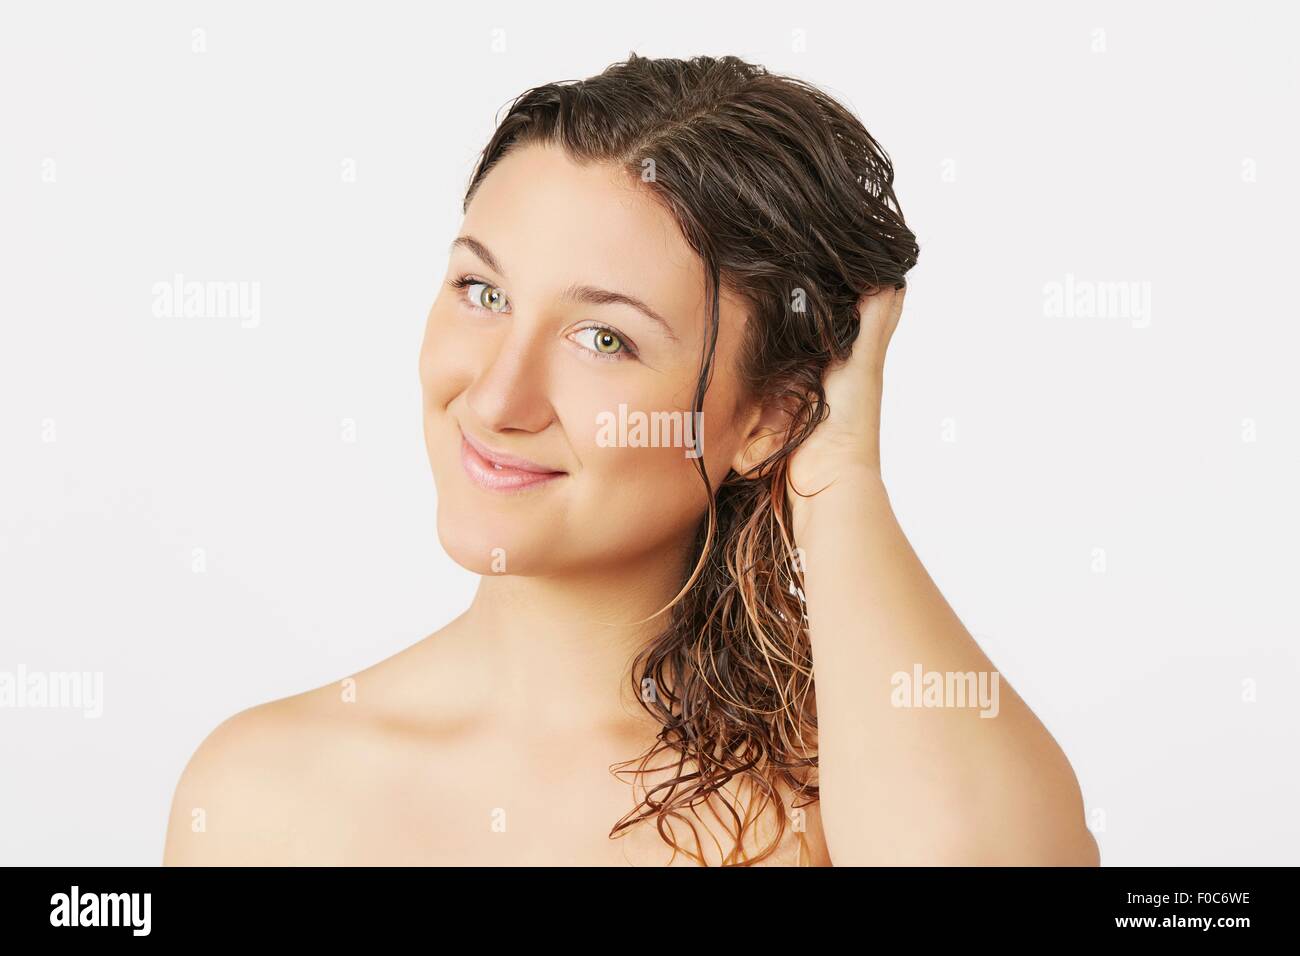 Young woman with wet hair Stock Photo